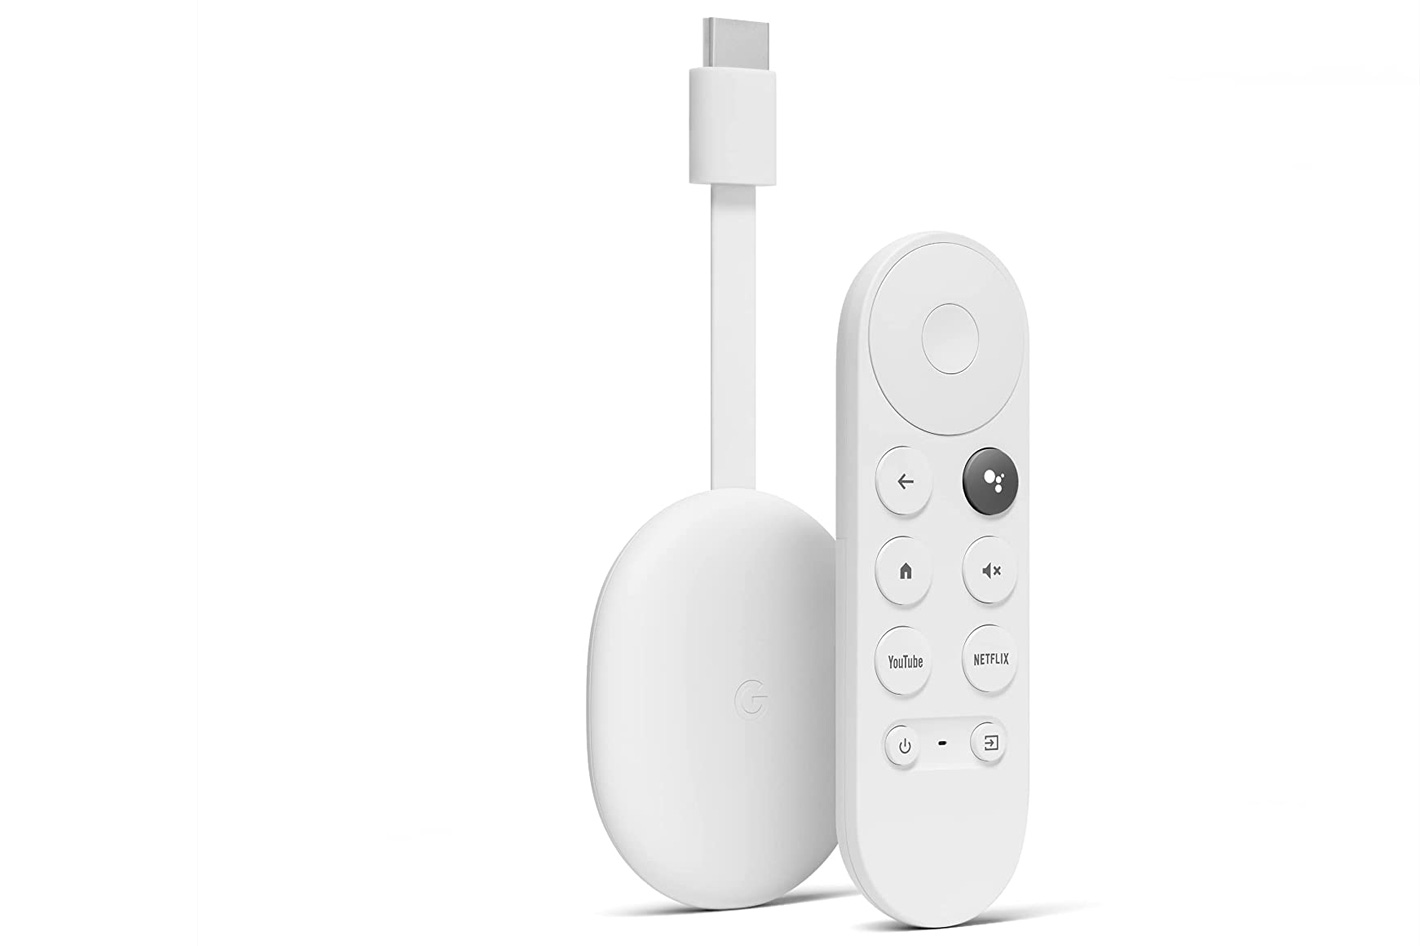 Google now offers a cheaper, 1080p version of the Chromecast with Google TV